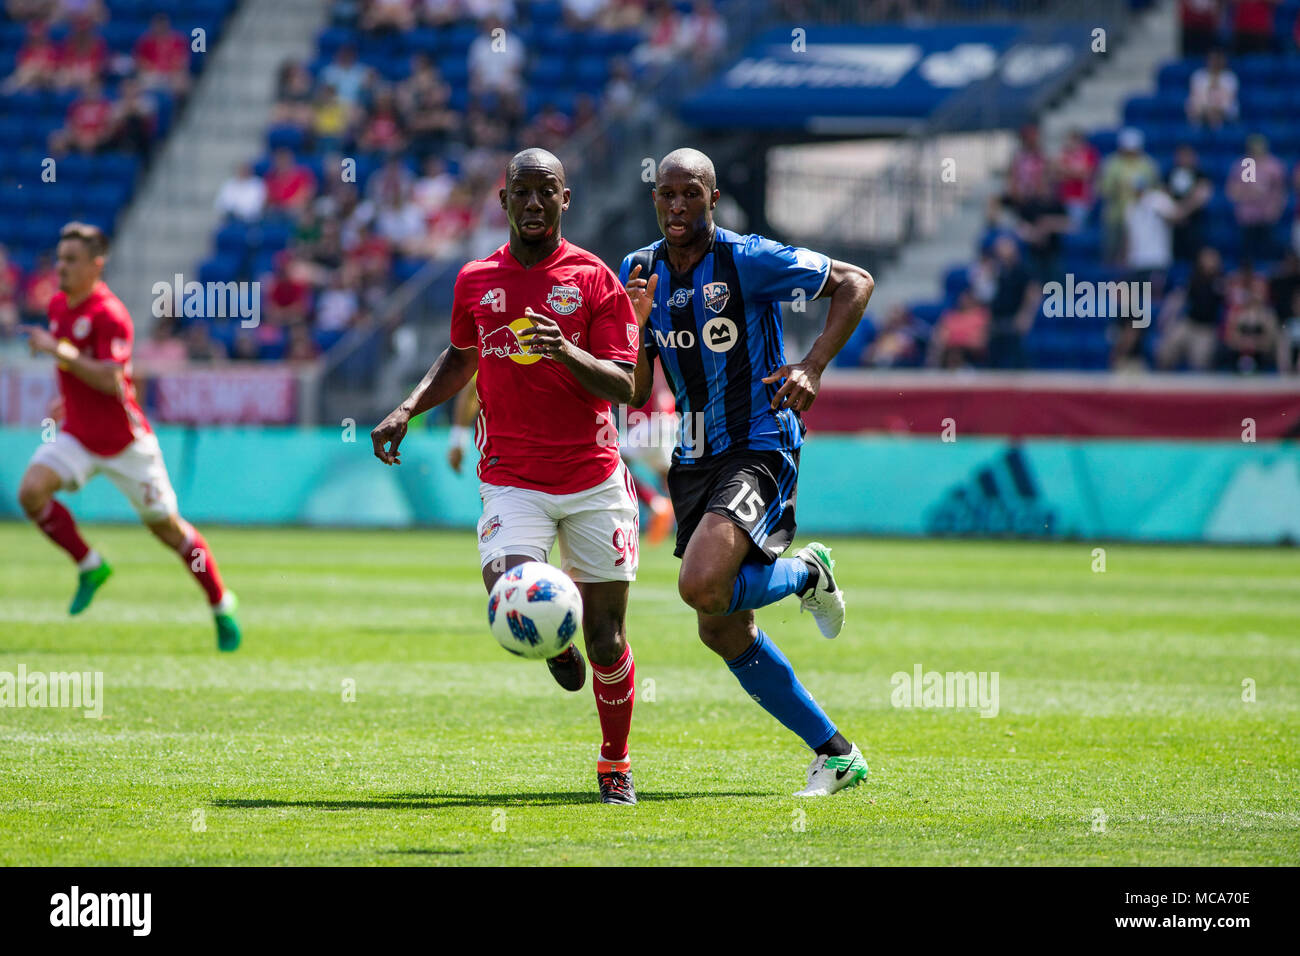 New Jersey, USA. 14th April, 2018. Harrison, NJ; Bradley Wright-Phillips (99) and Rod Fanni (15) battle for the ball in the first half of the match. The Red Bulls defeated the Impact 3-1. Stock Photo